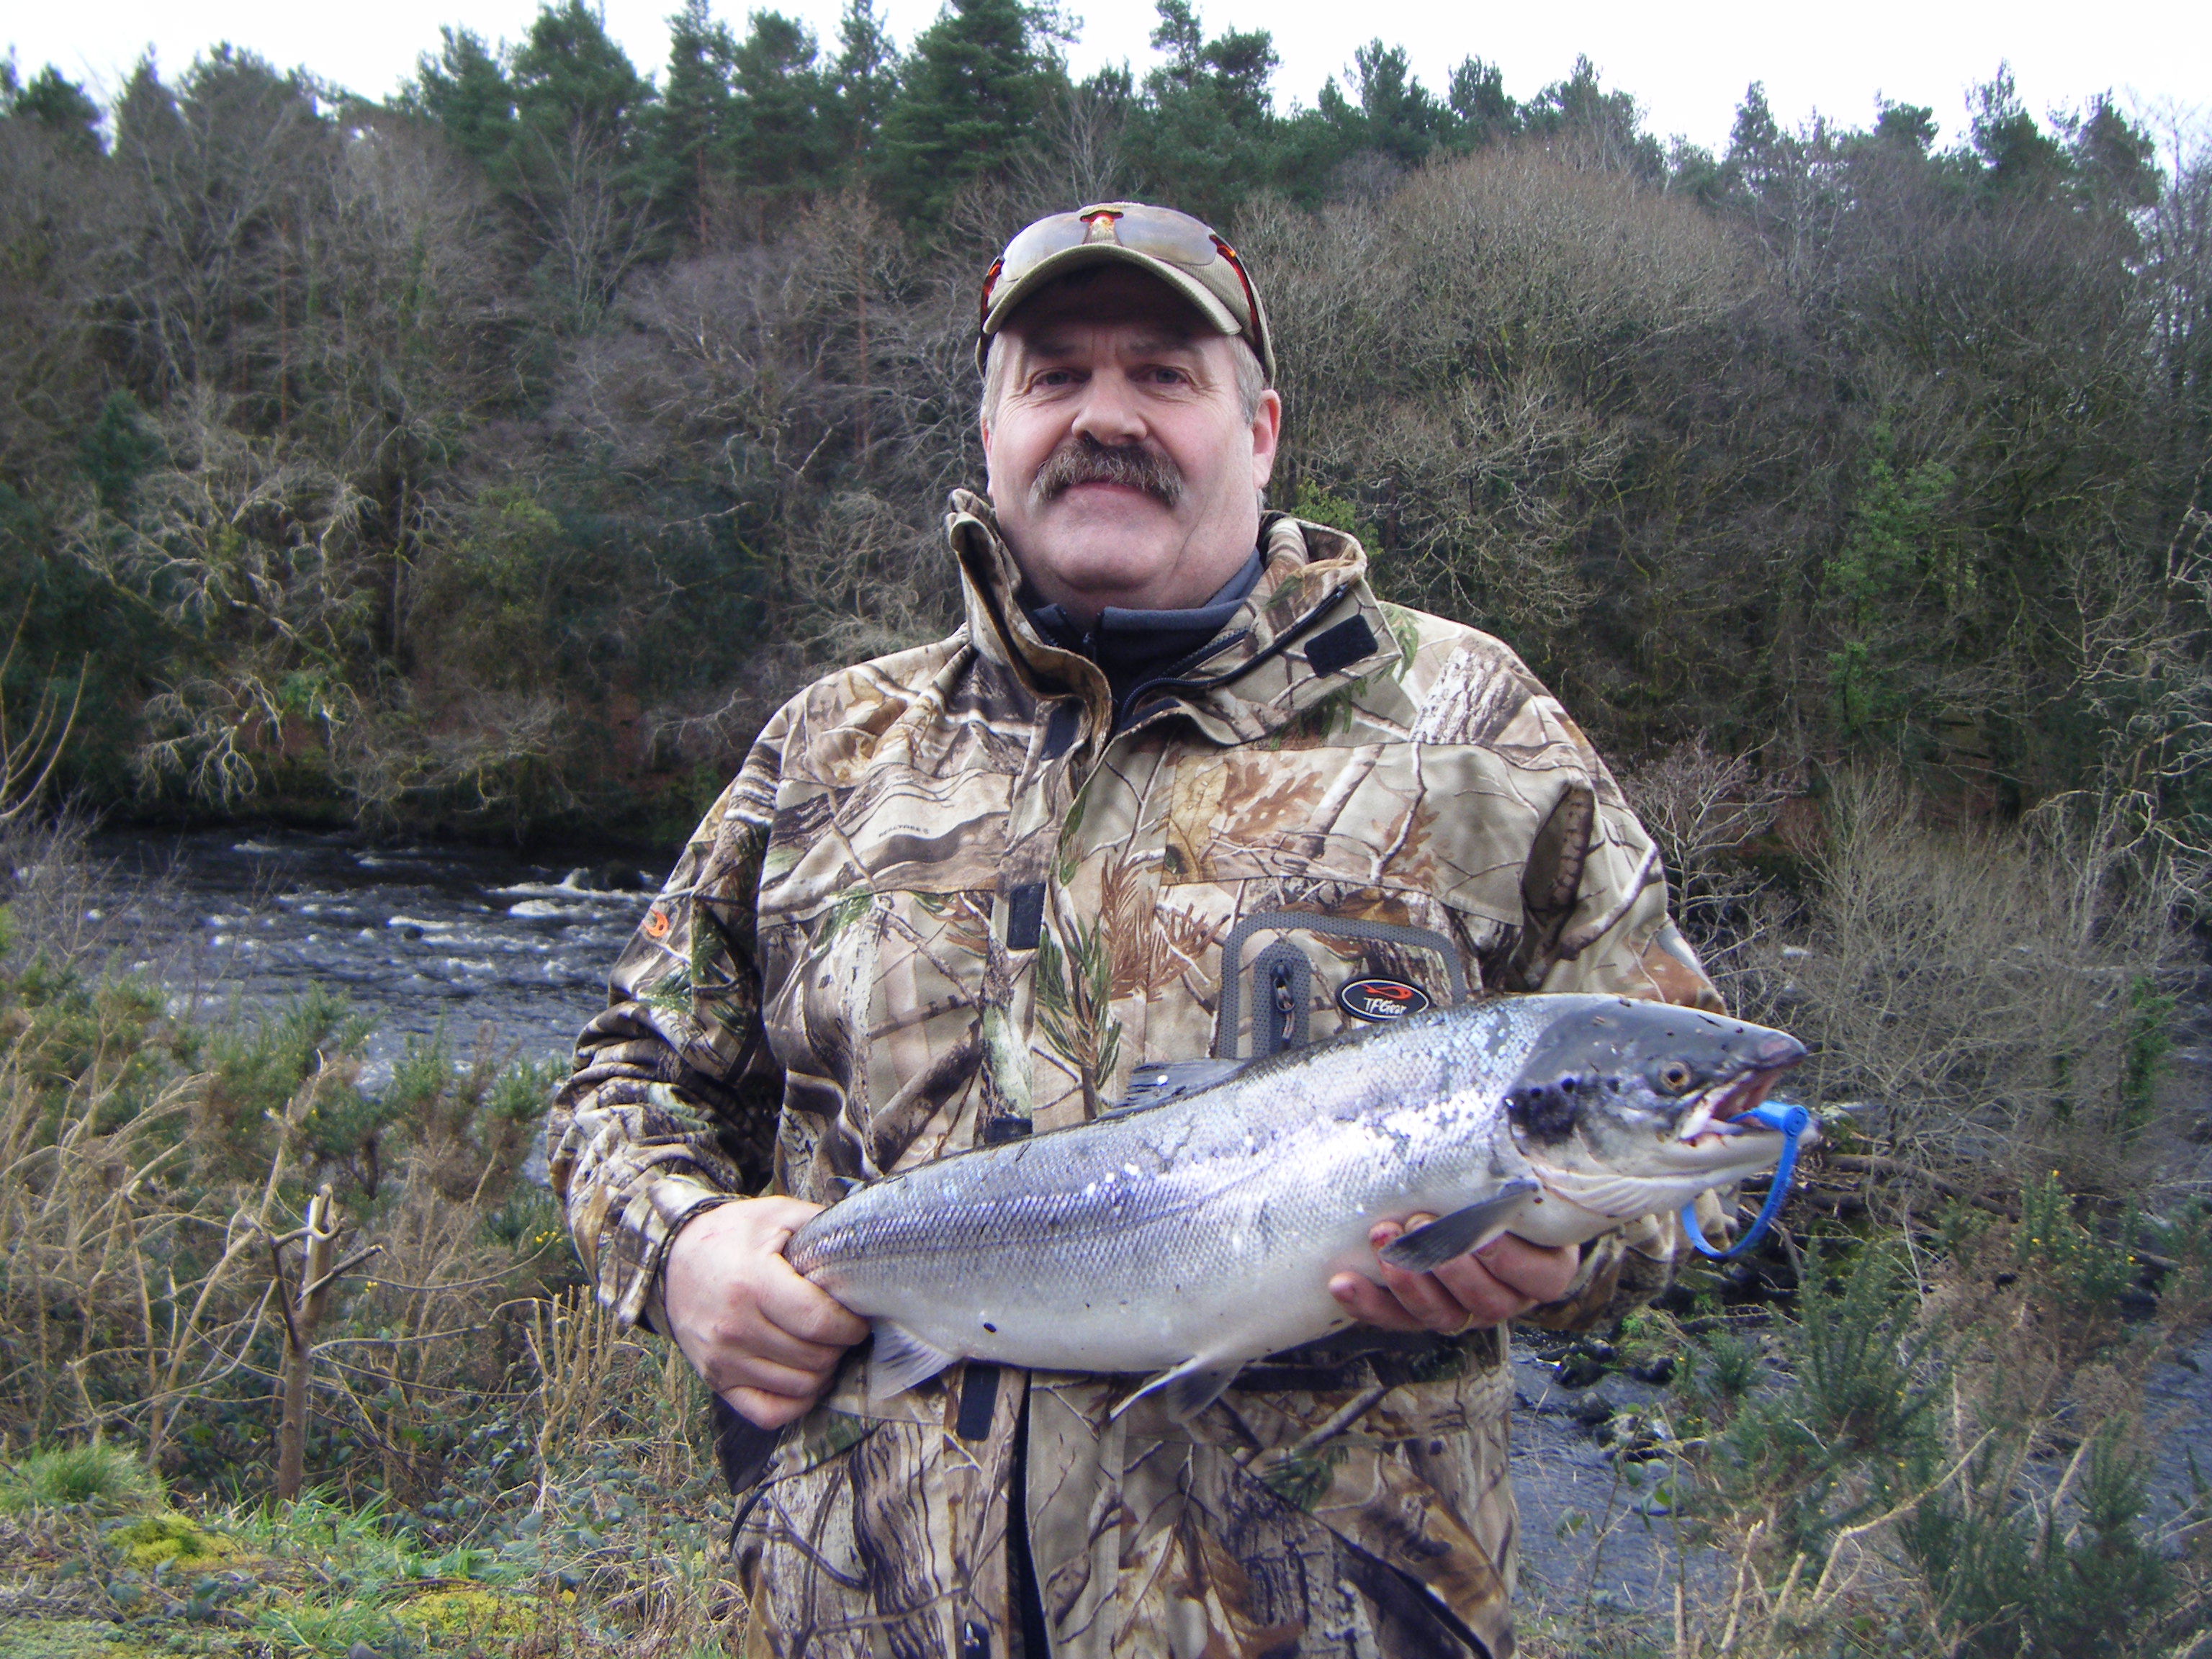 Damion Dillon with the first Kerry salmon of the year